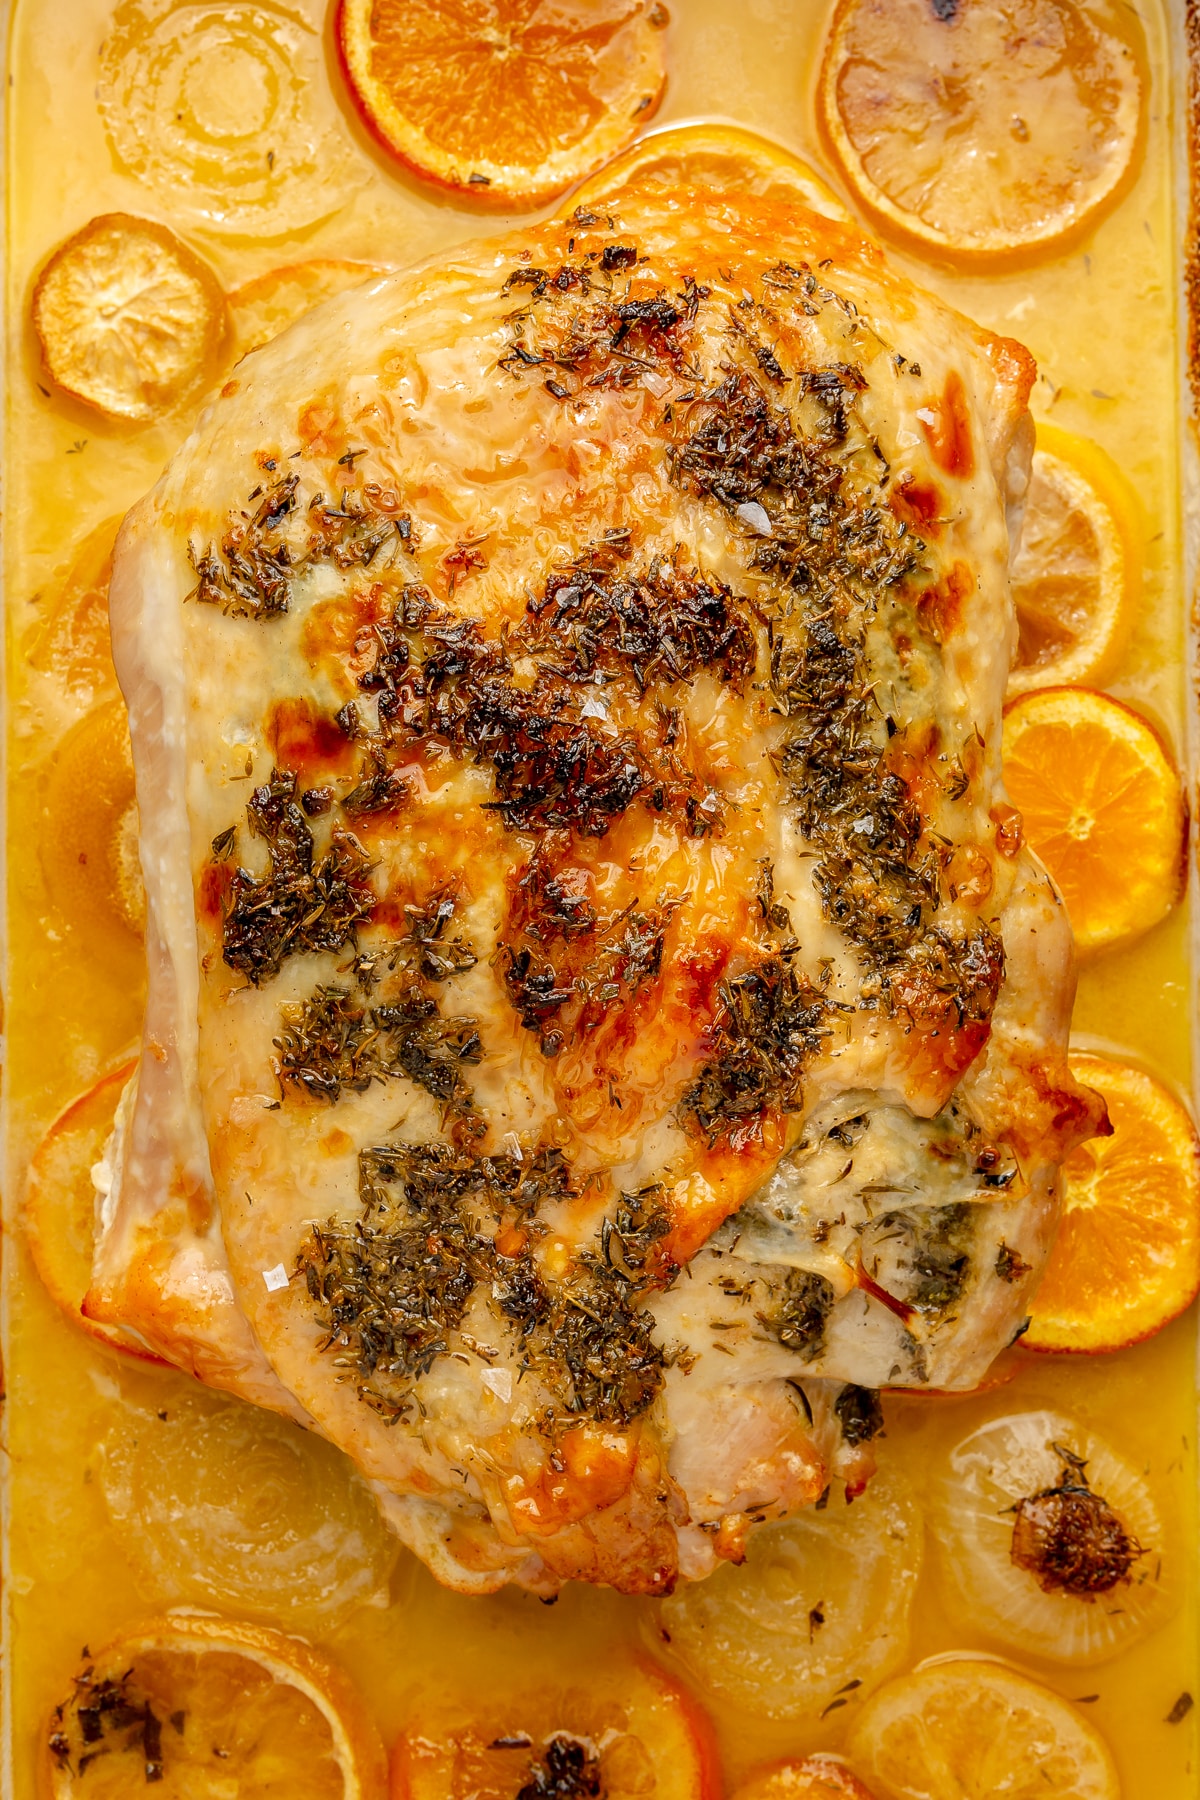 Fully cooked turkey breast is shown surrounded by the, now browned, slices of orange, lemon, and onion.